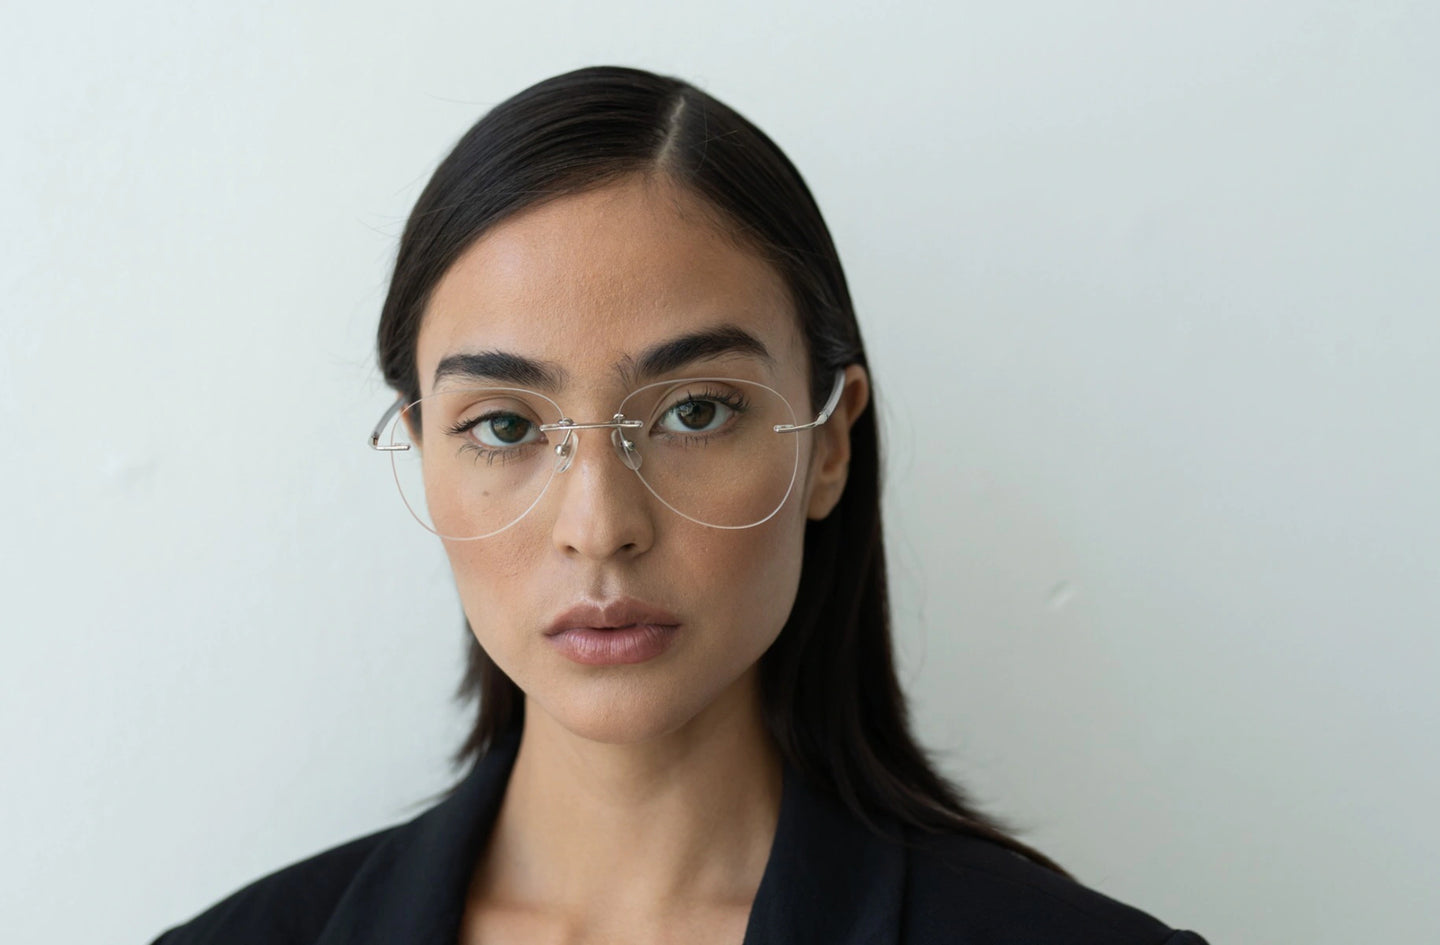 What Are The Pros And Cons Of Rimless Glasses?